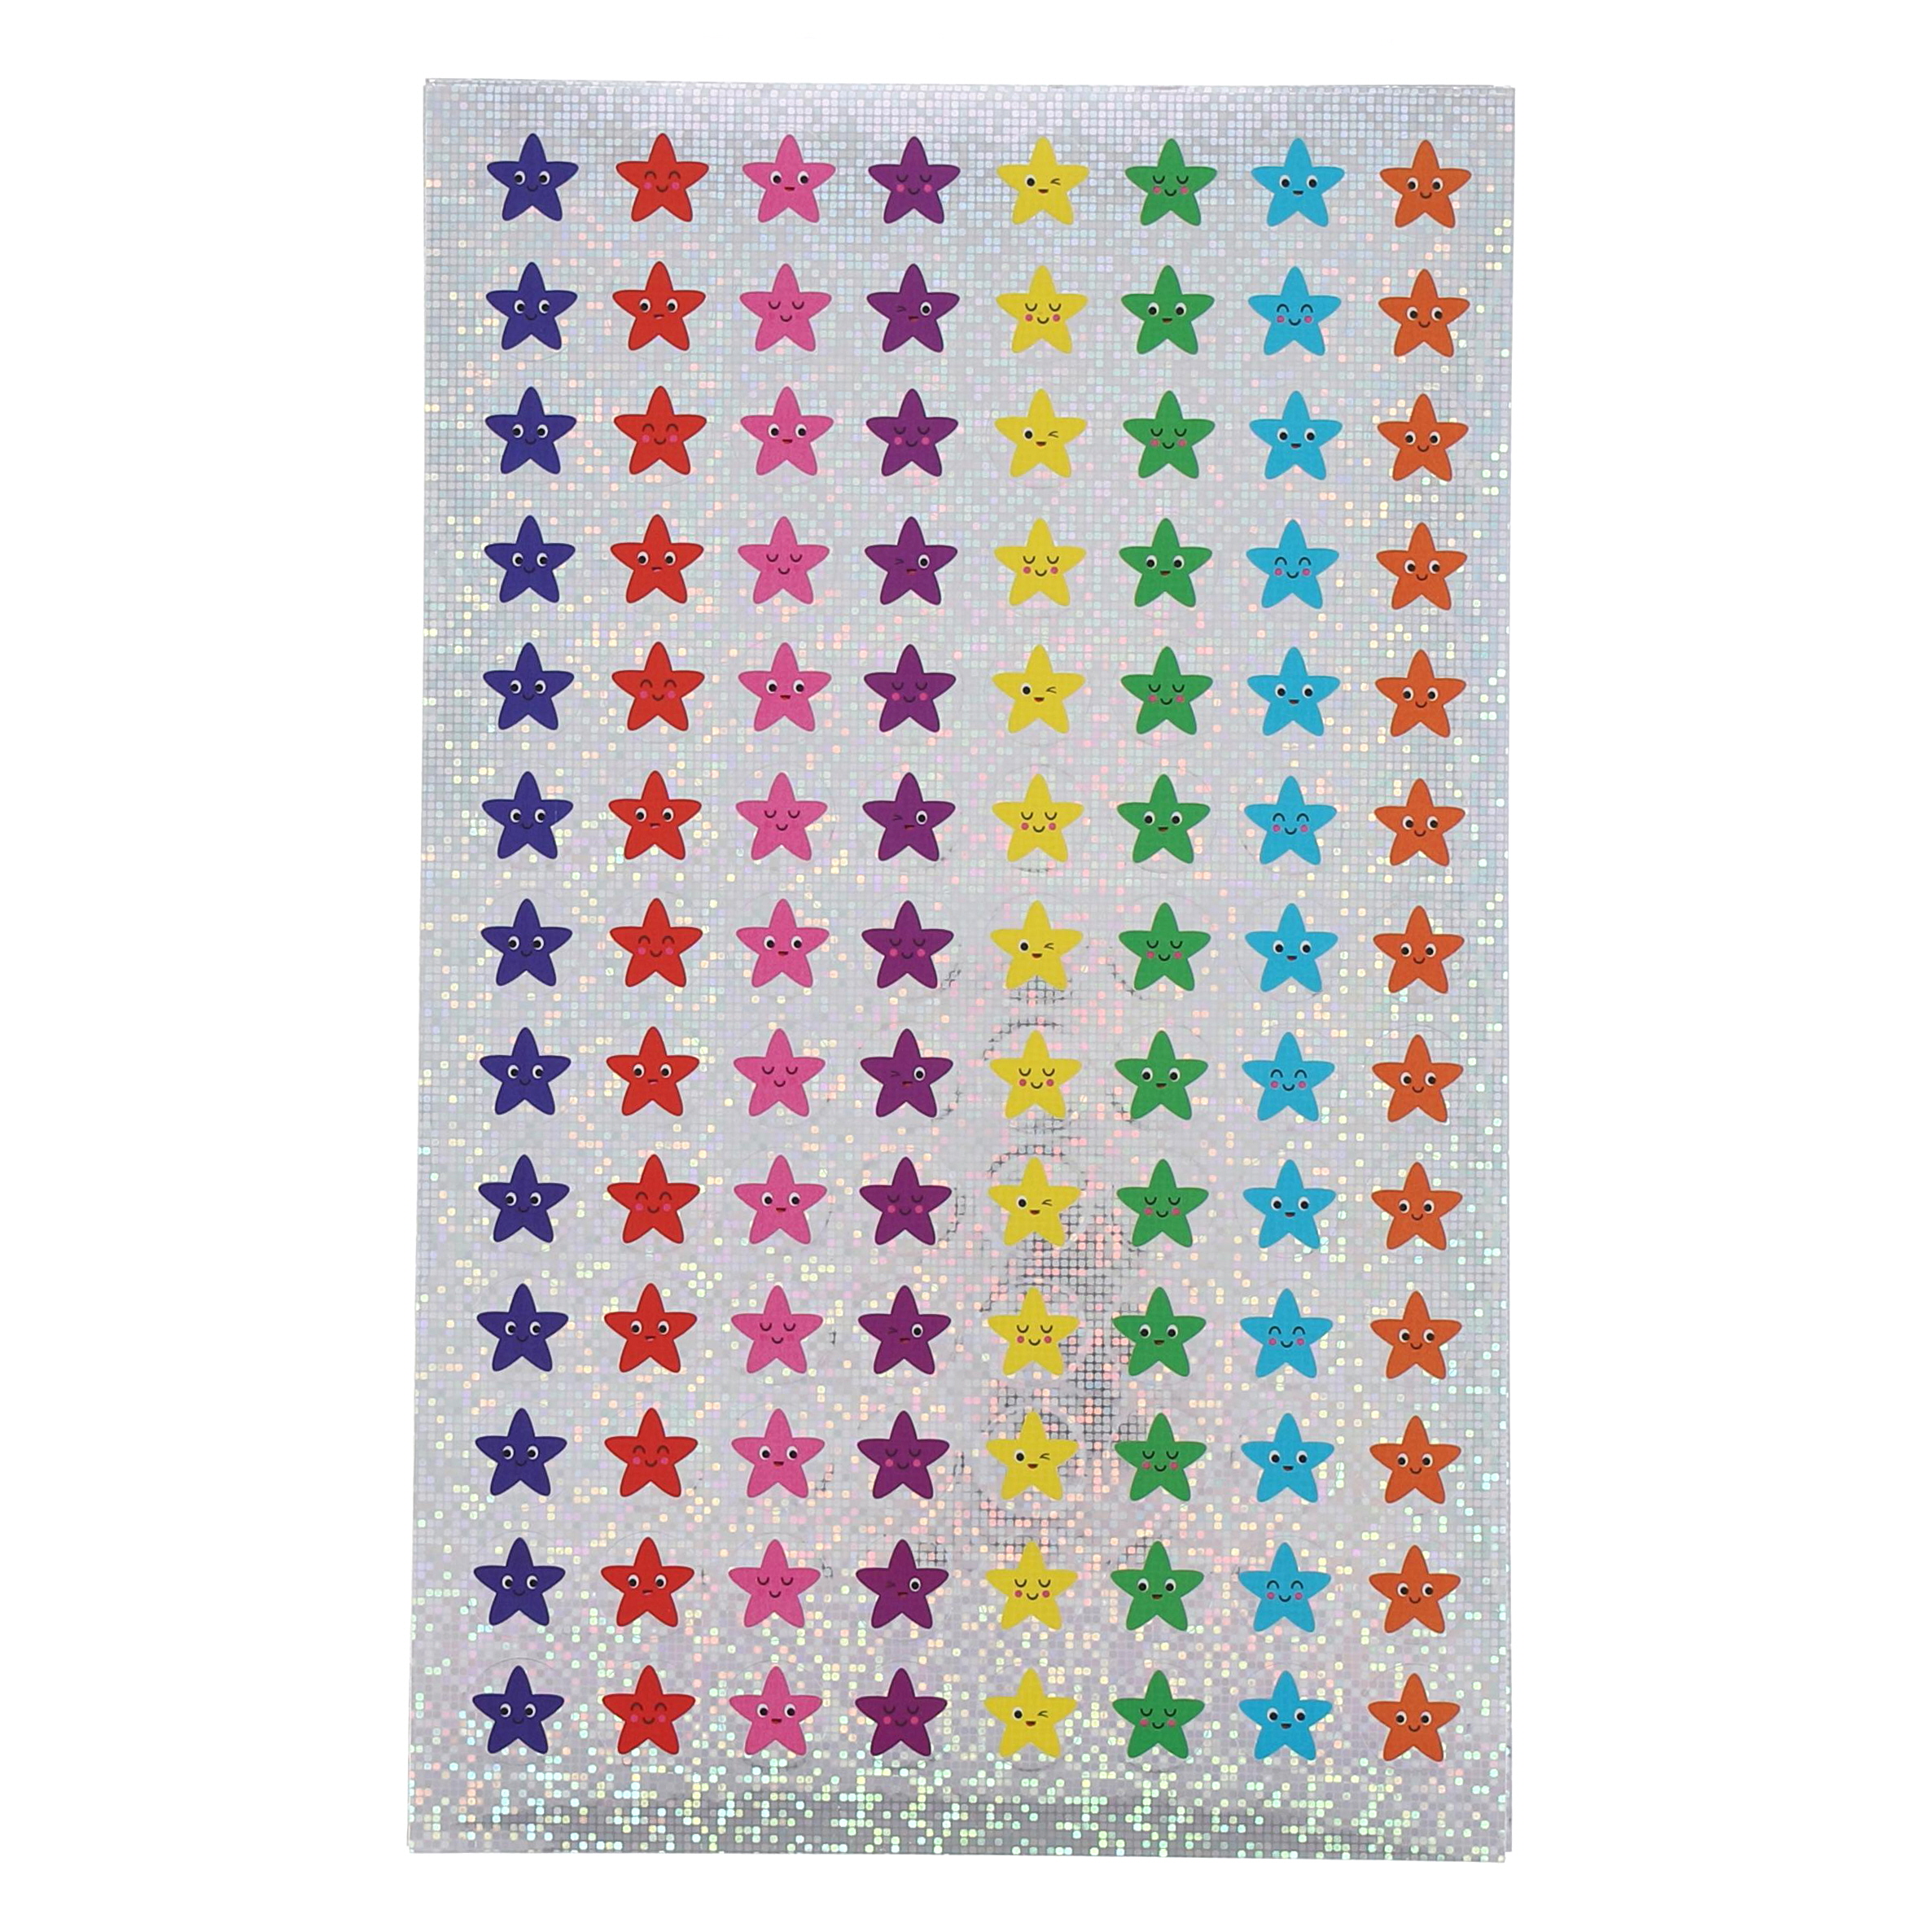 EDMT15112 - Classmates Sparkly Mini Star Stickers - 12mm - Pack of 416 ...